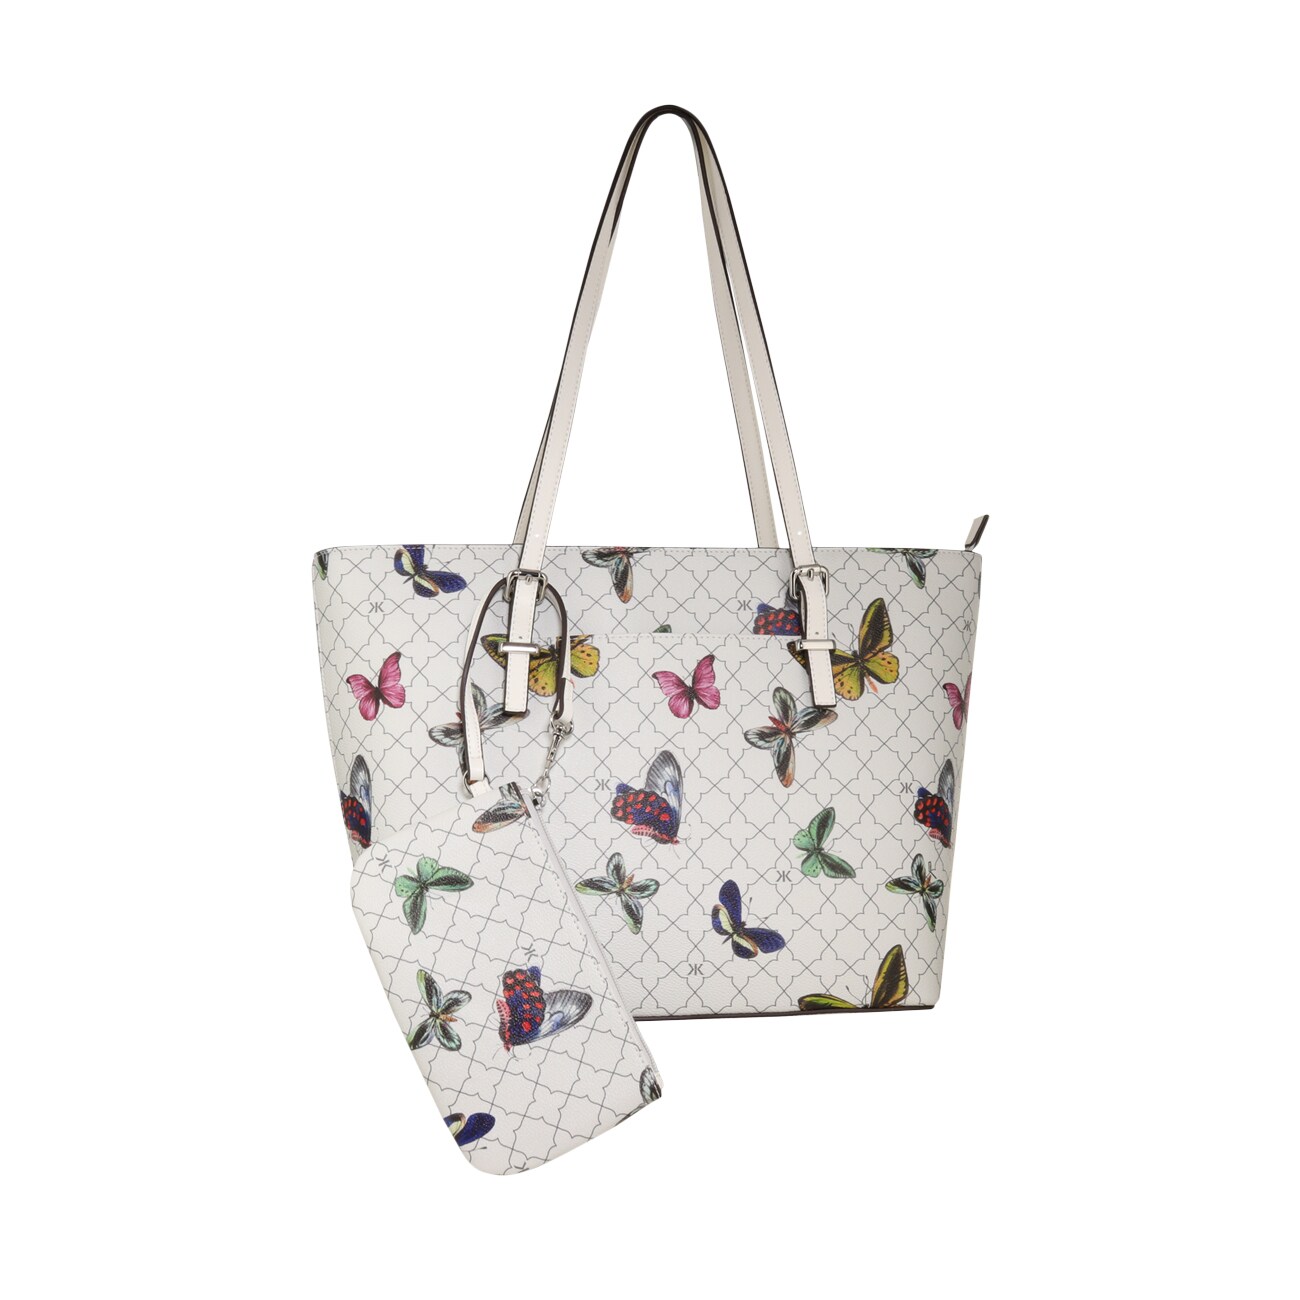 kelly and katie tote bags